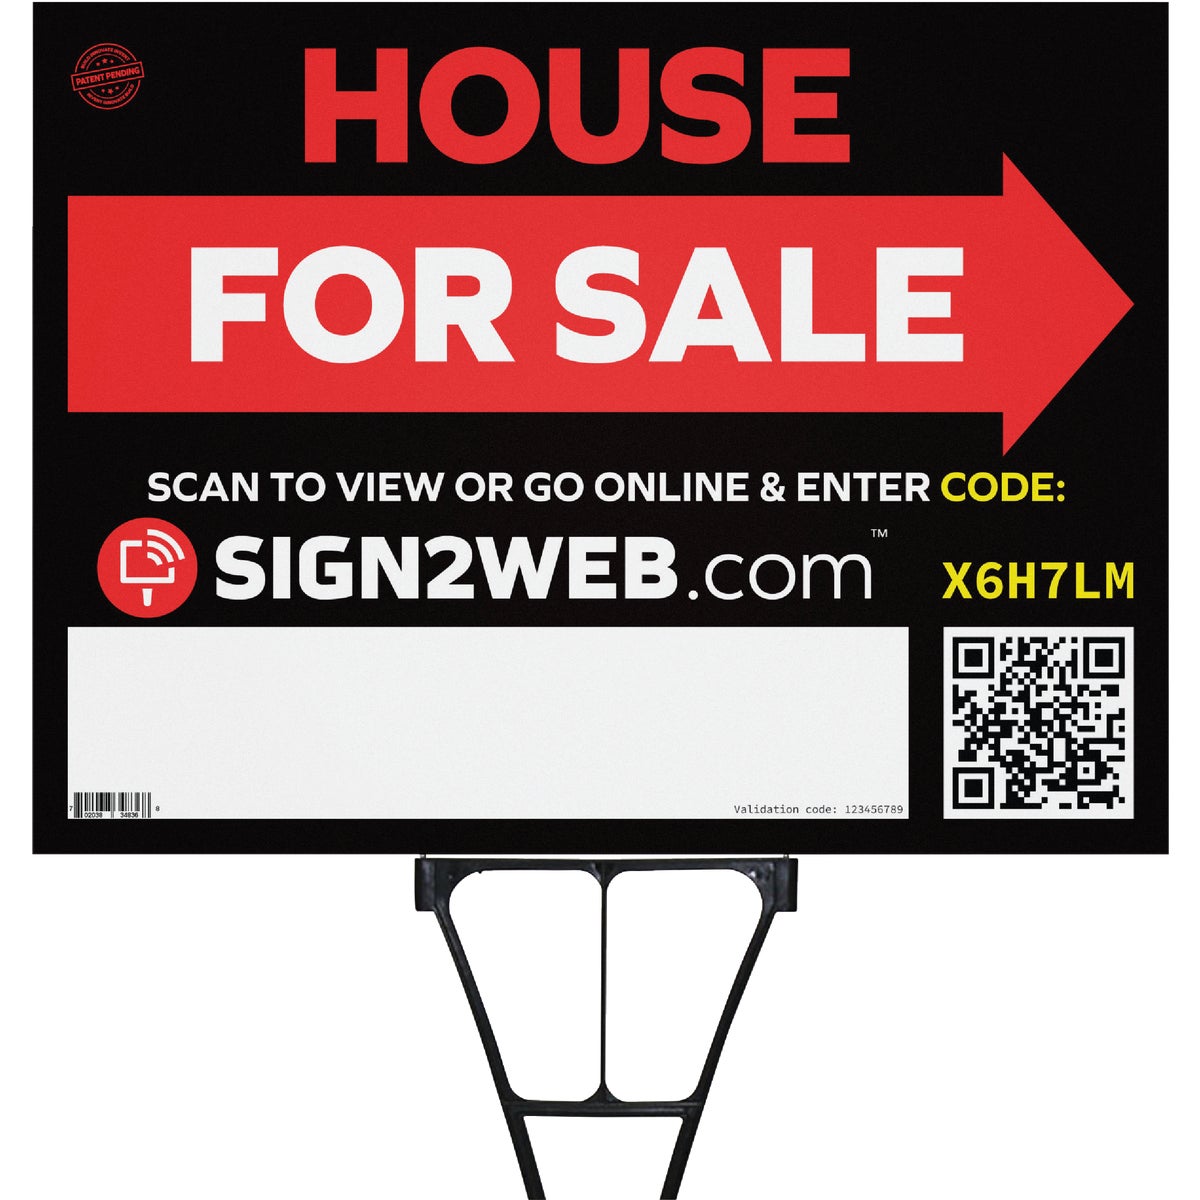 Item 201524, Double-sided web enabled House For Sale with arrow sign showcases your sale